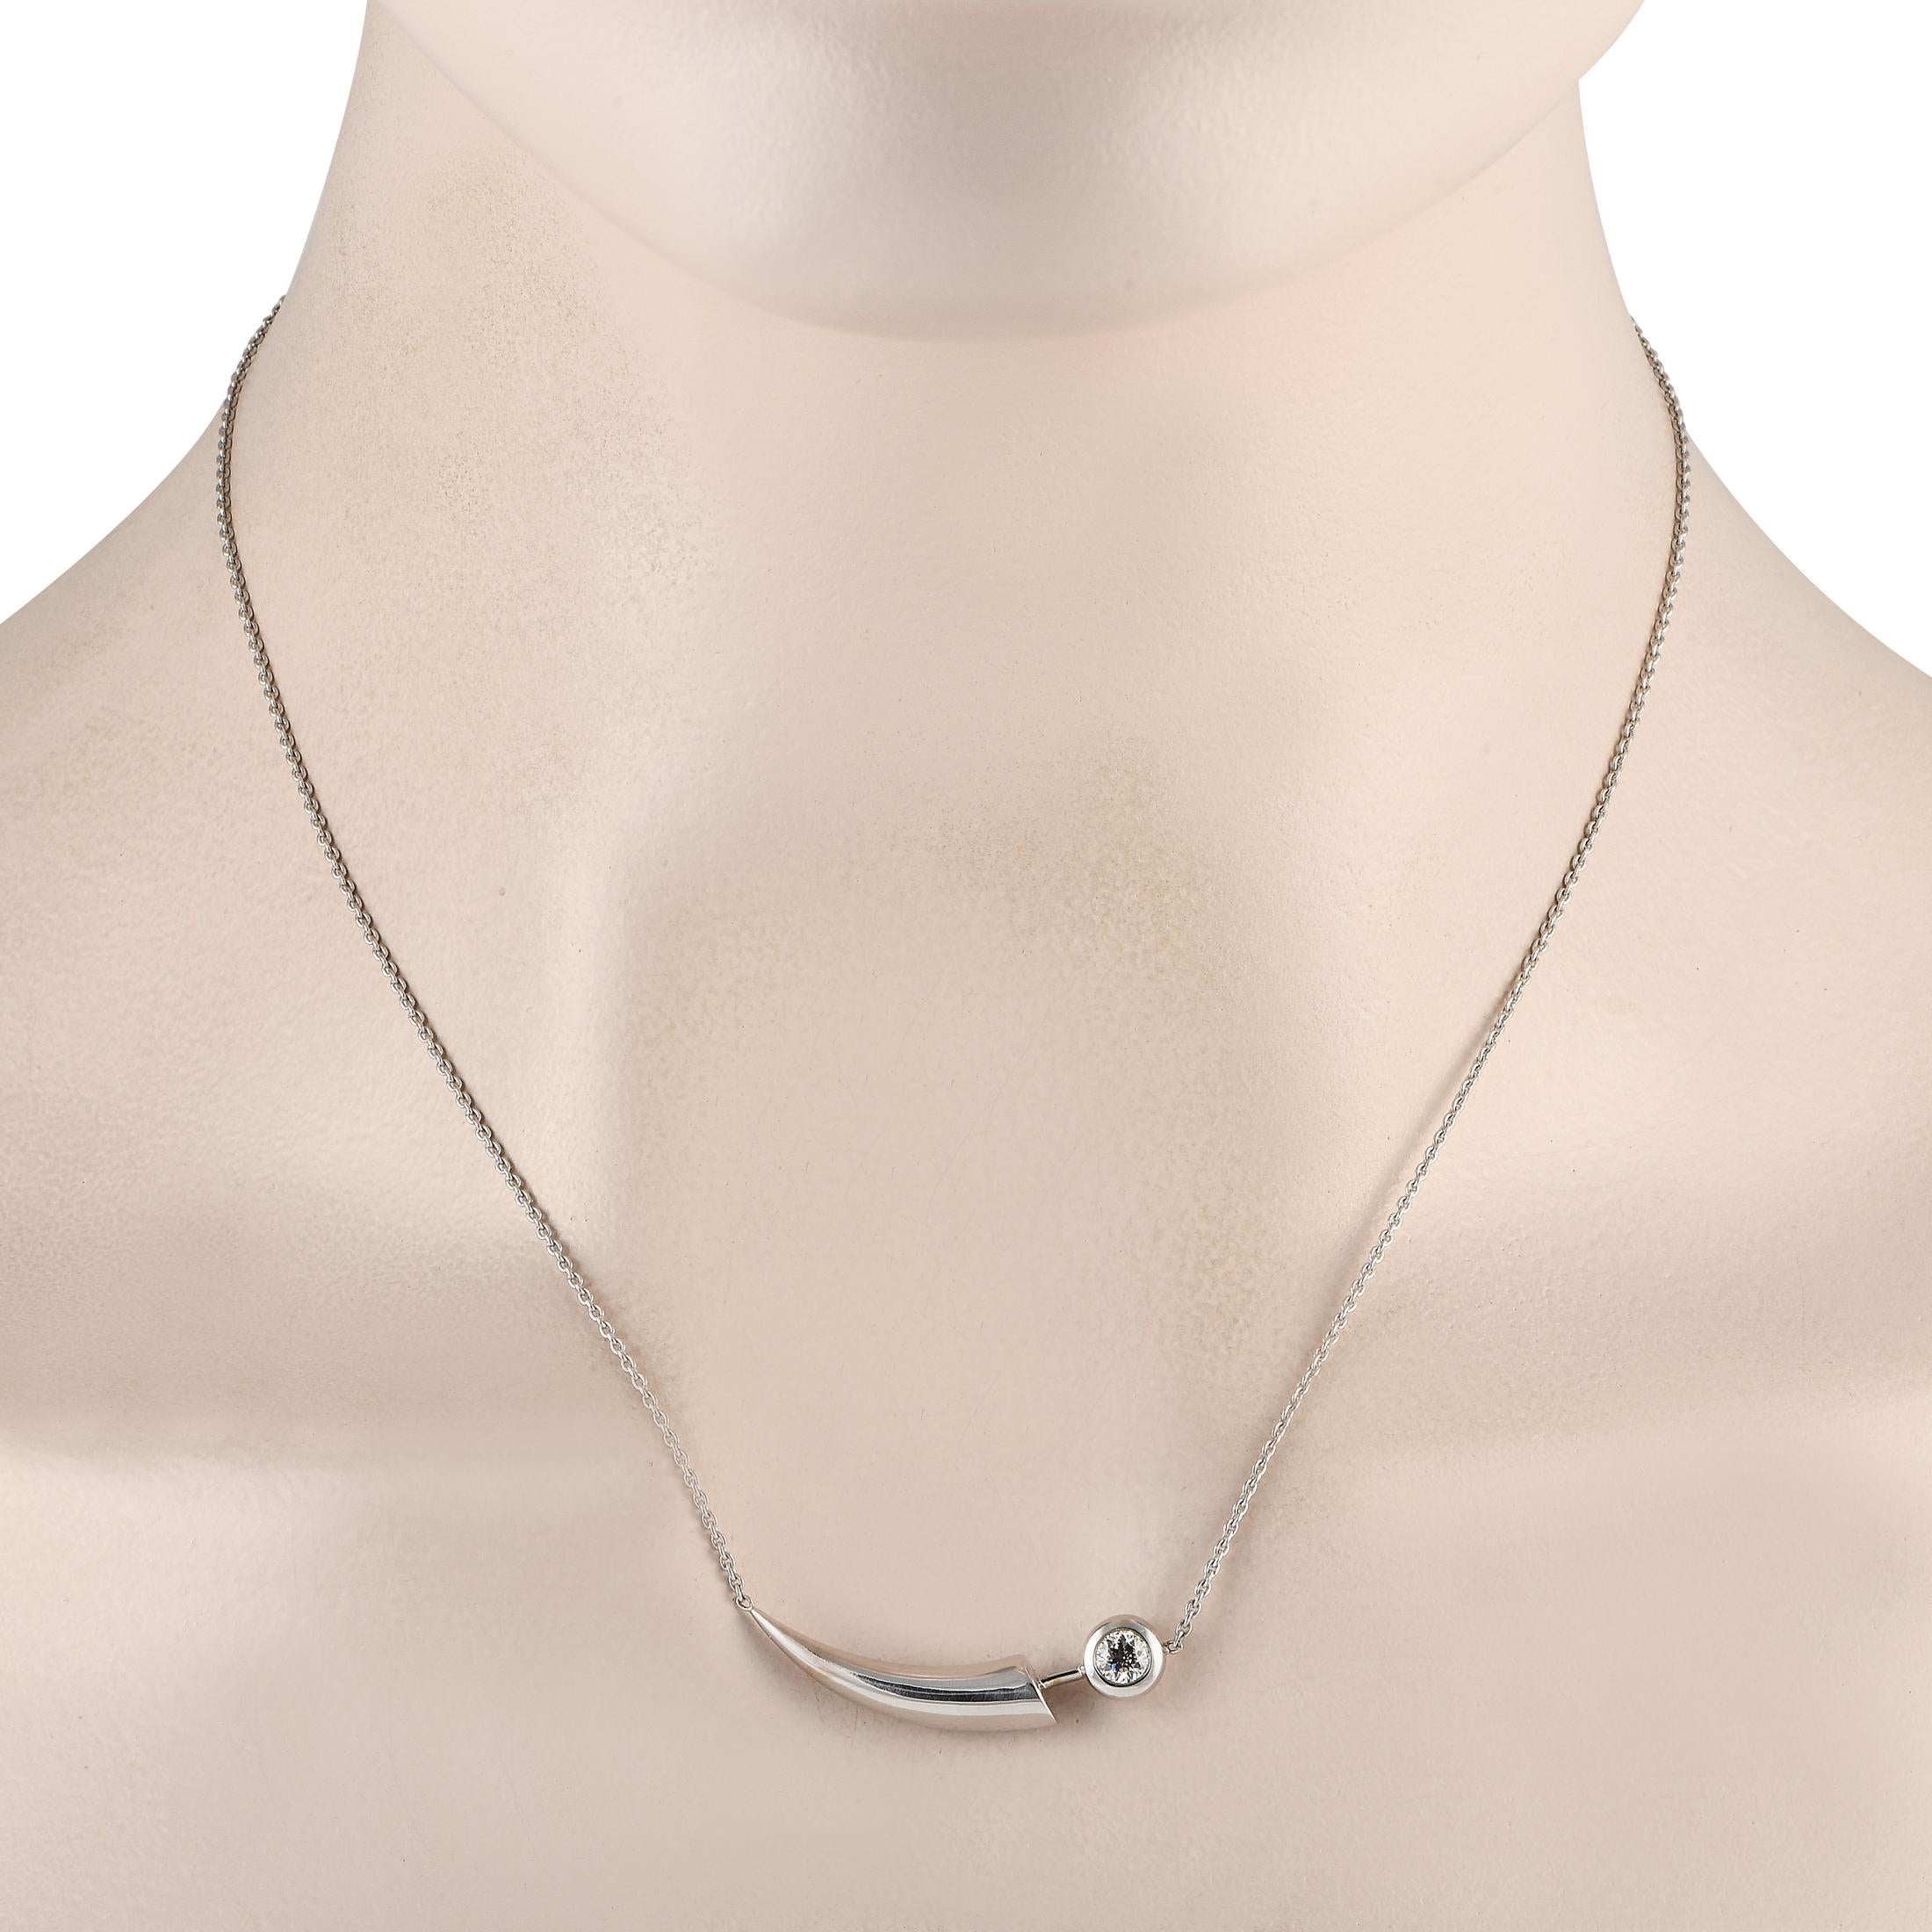 This Roberto Coin Fang necklace is an elegant, understated accessory that is ideal for any occasion. At the center of this pieces 16 chain, an 18K White Gold pendant measuring 0.50 long by 1.25 wide comes to life thanks to its sleek shape and a 0.30